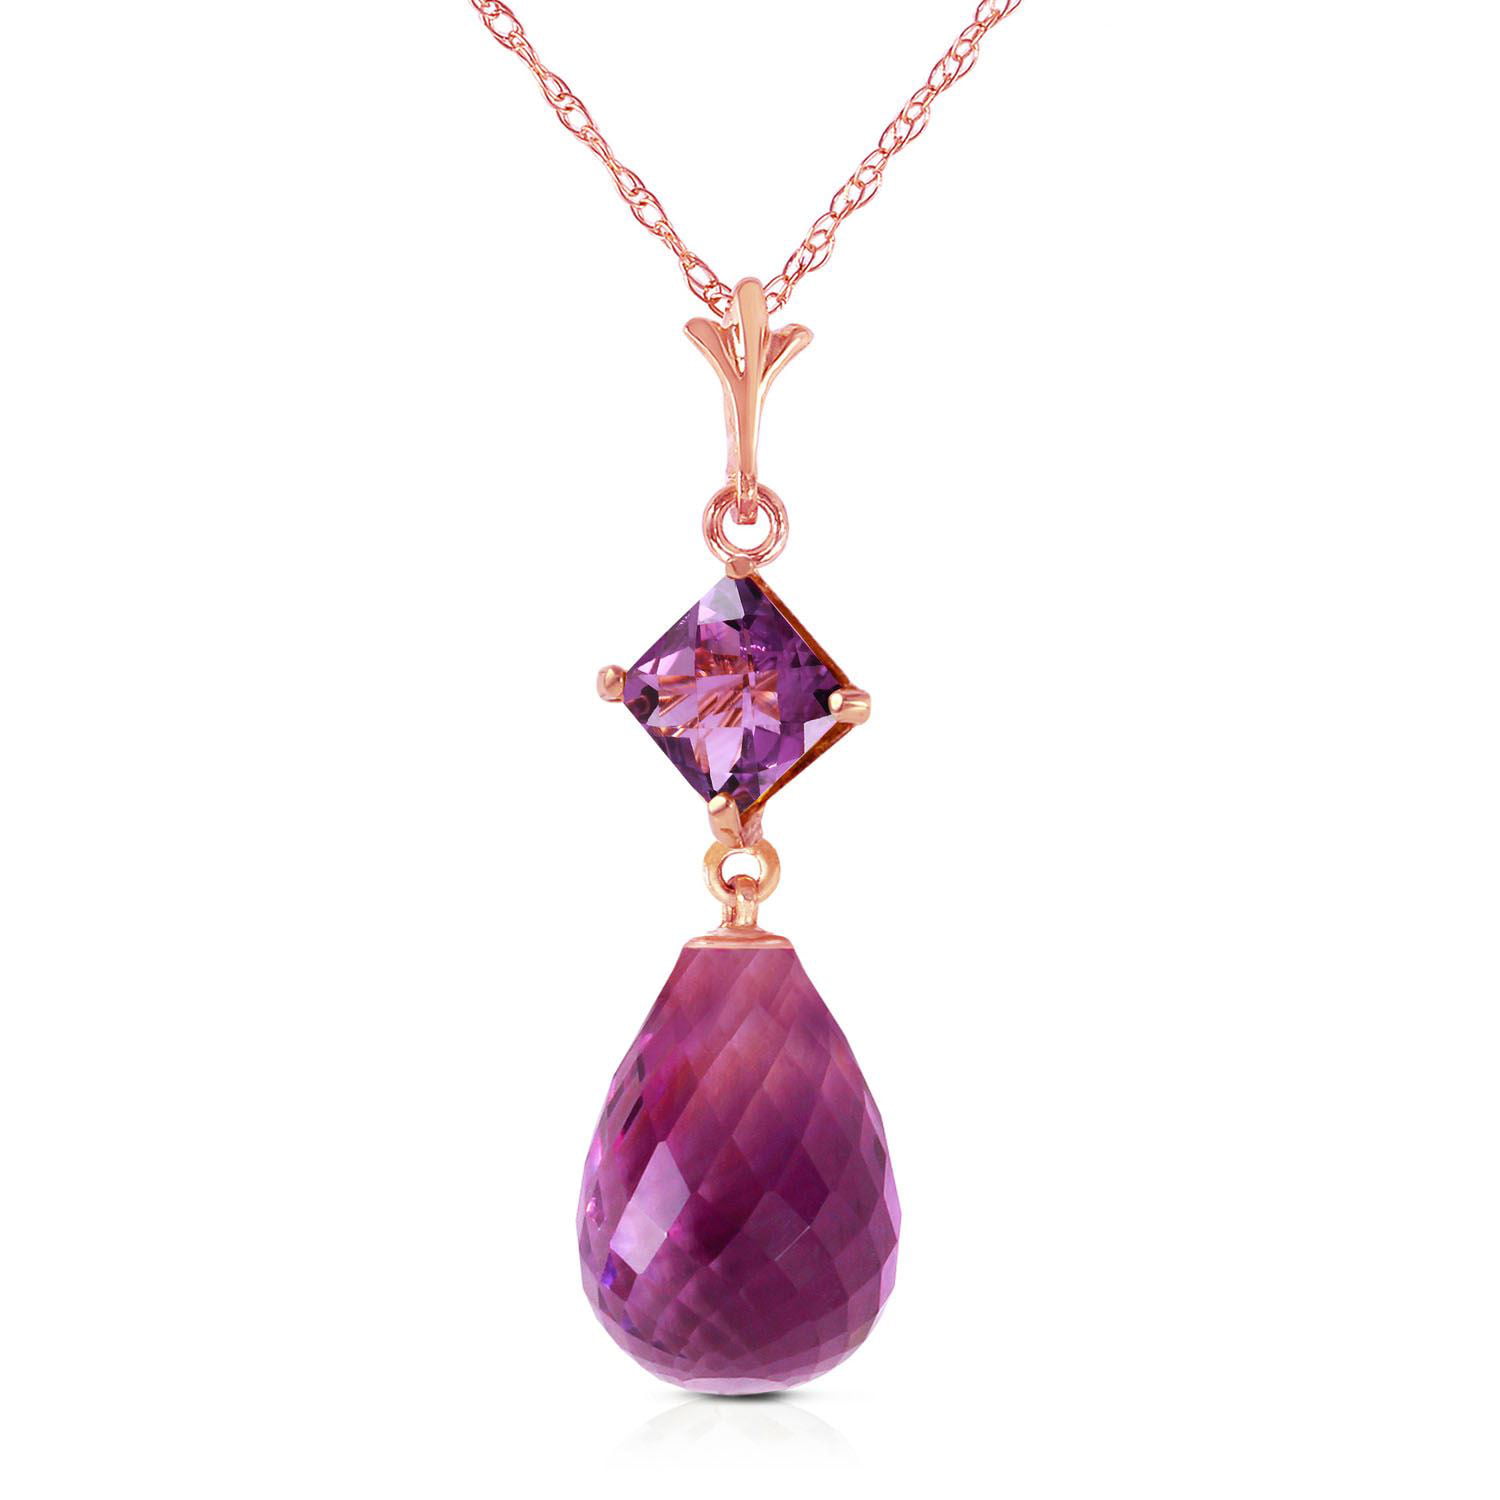 ALARRI 14K Solid Rose Gold Necklace w/ Purple Amethysts & Peridots with 20 Inch Chain Length 